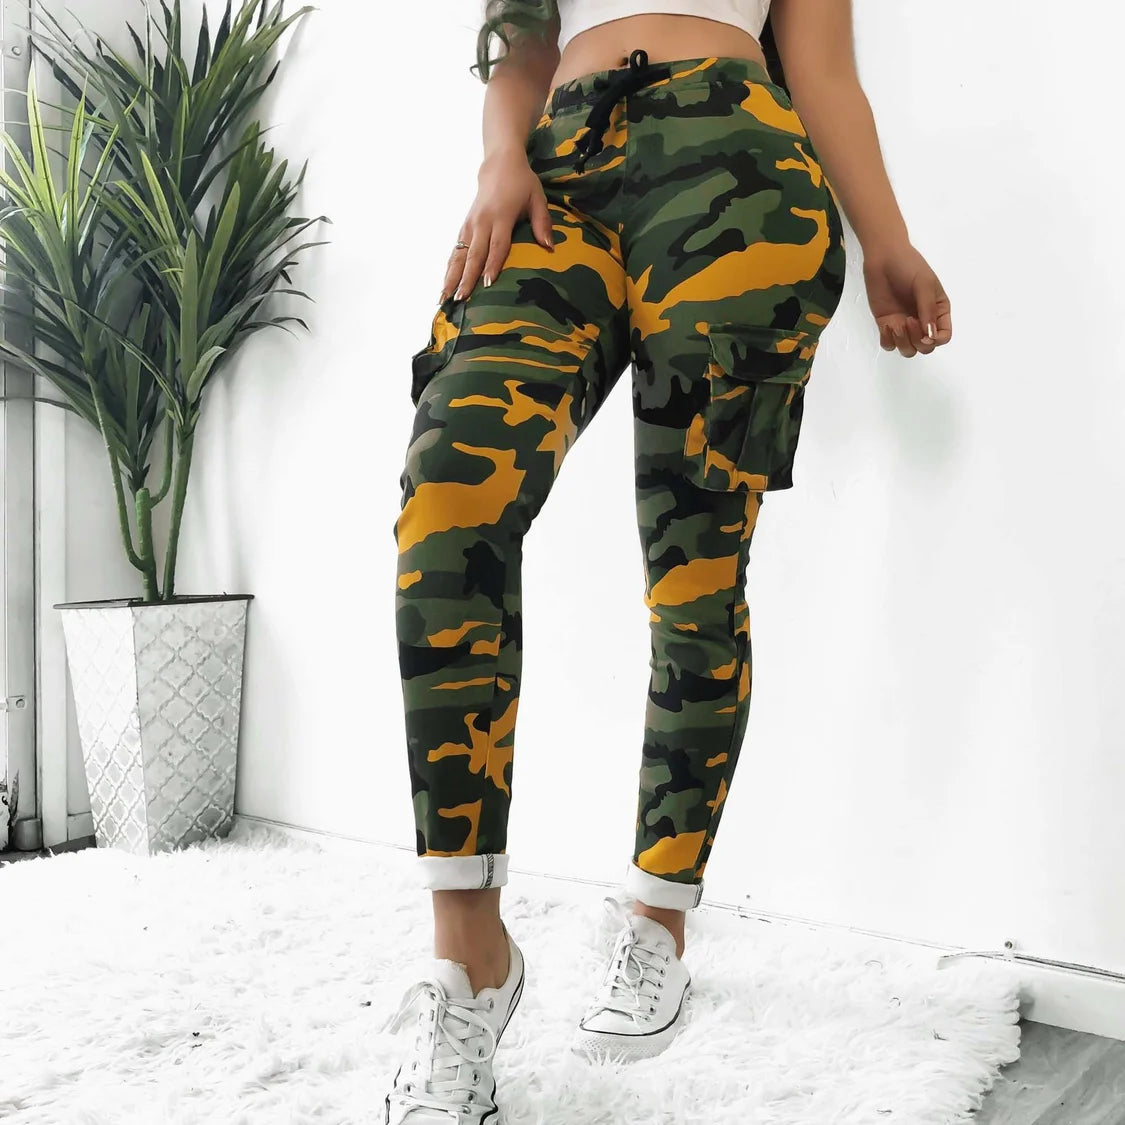 NEW Women High Waist Camouflage Joggers Trousers Ladies Casual Camo Cargo Pants Female Casual Polyester Elastic Pants